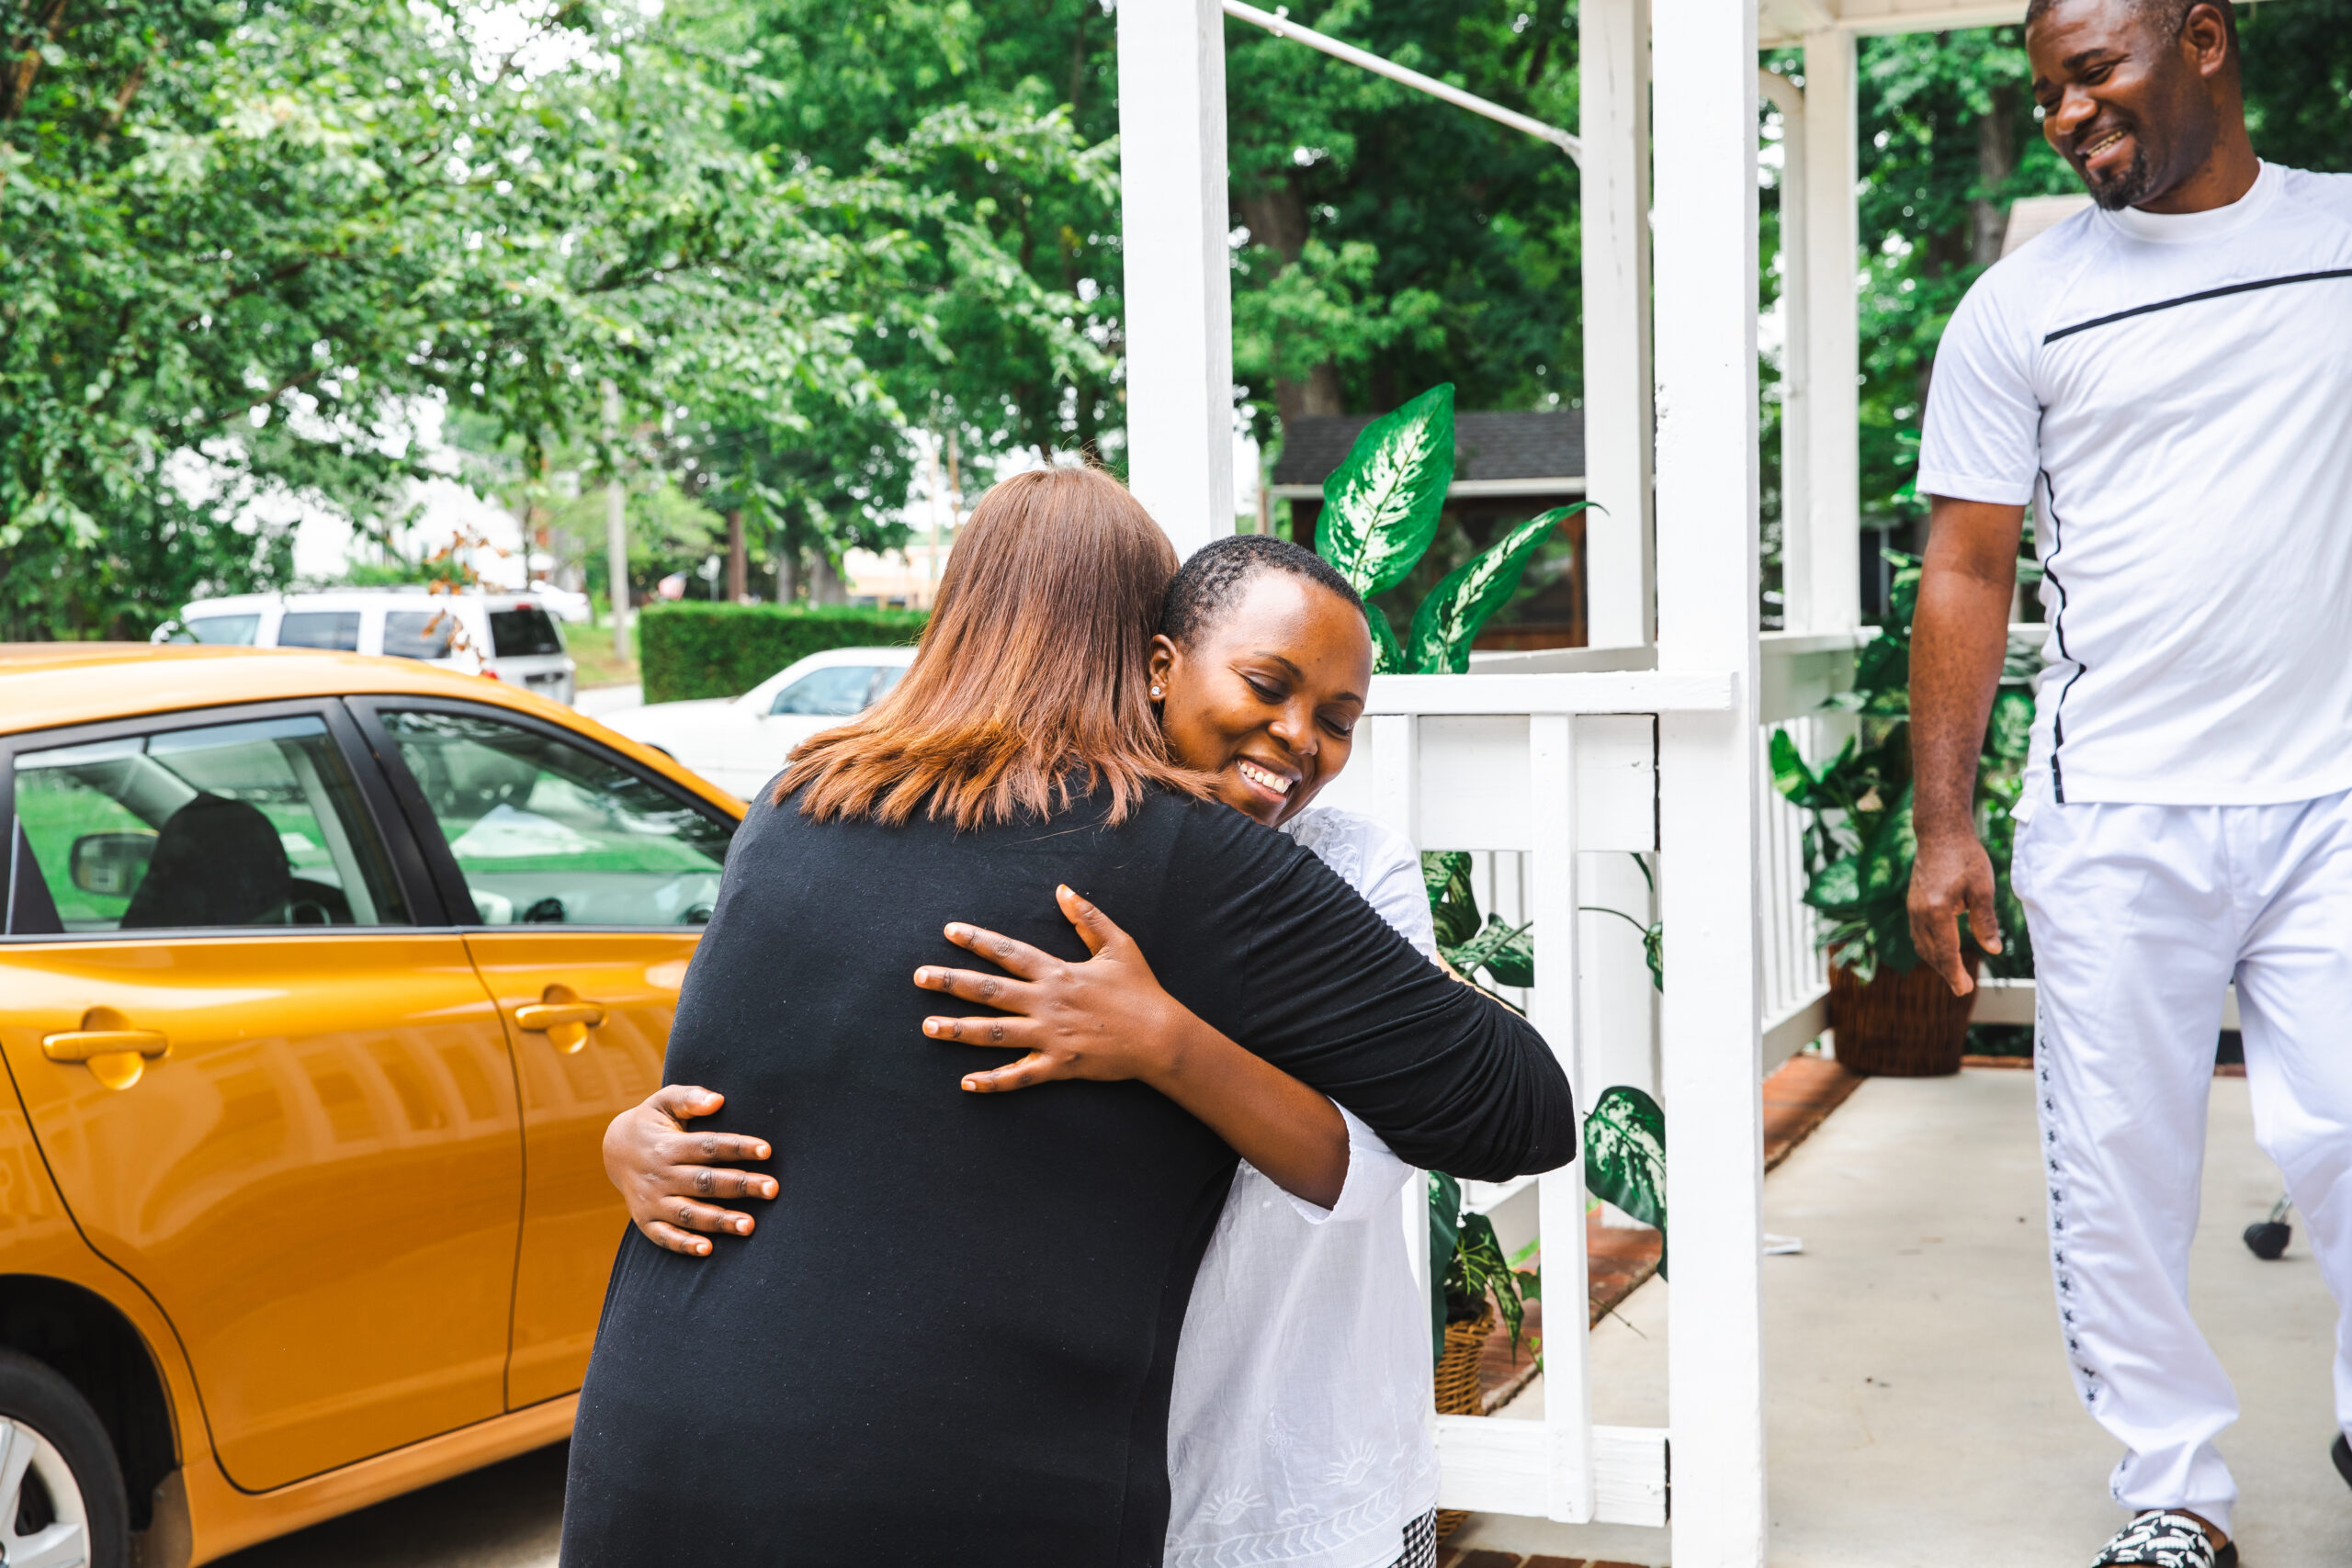 Post-Arrival Reception & Placement Program Officer at the World Relief, Kara Hernandez hugs Didi Lwamba, a client World Relief resettled from the Democratic Republic of the Congo.